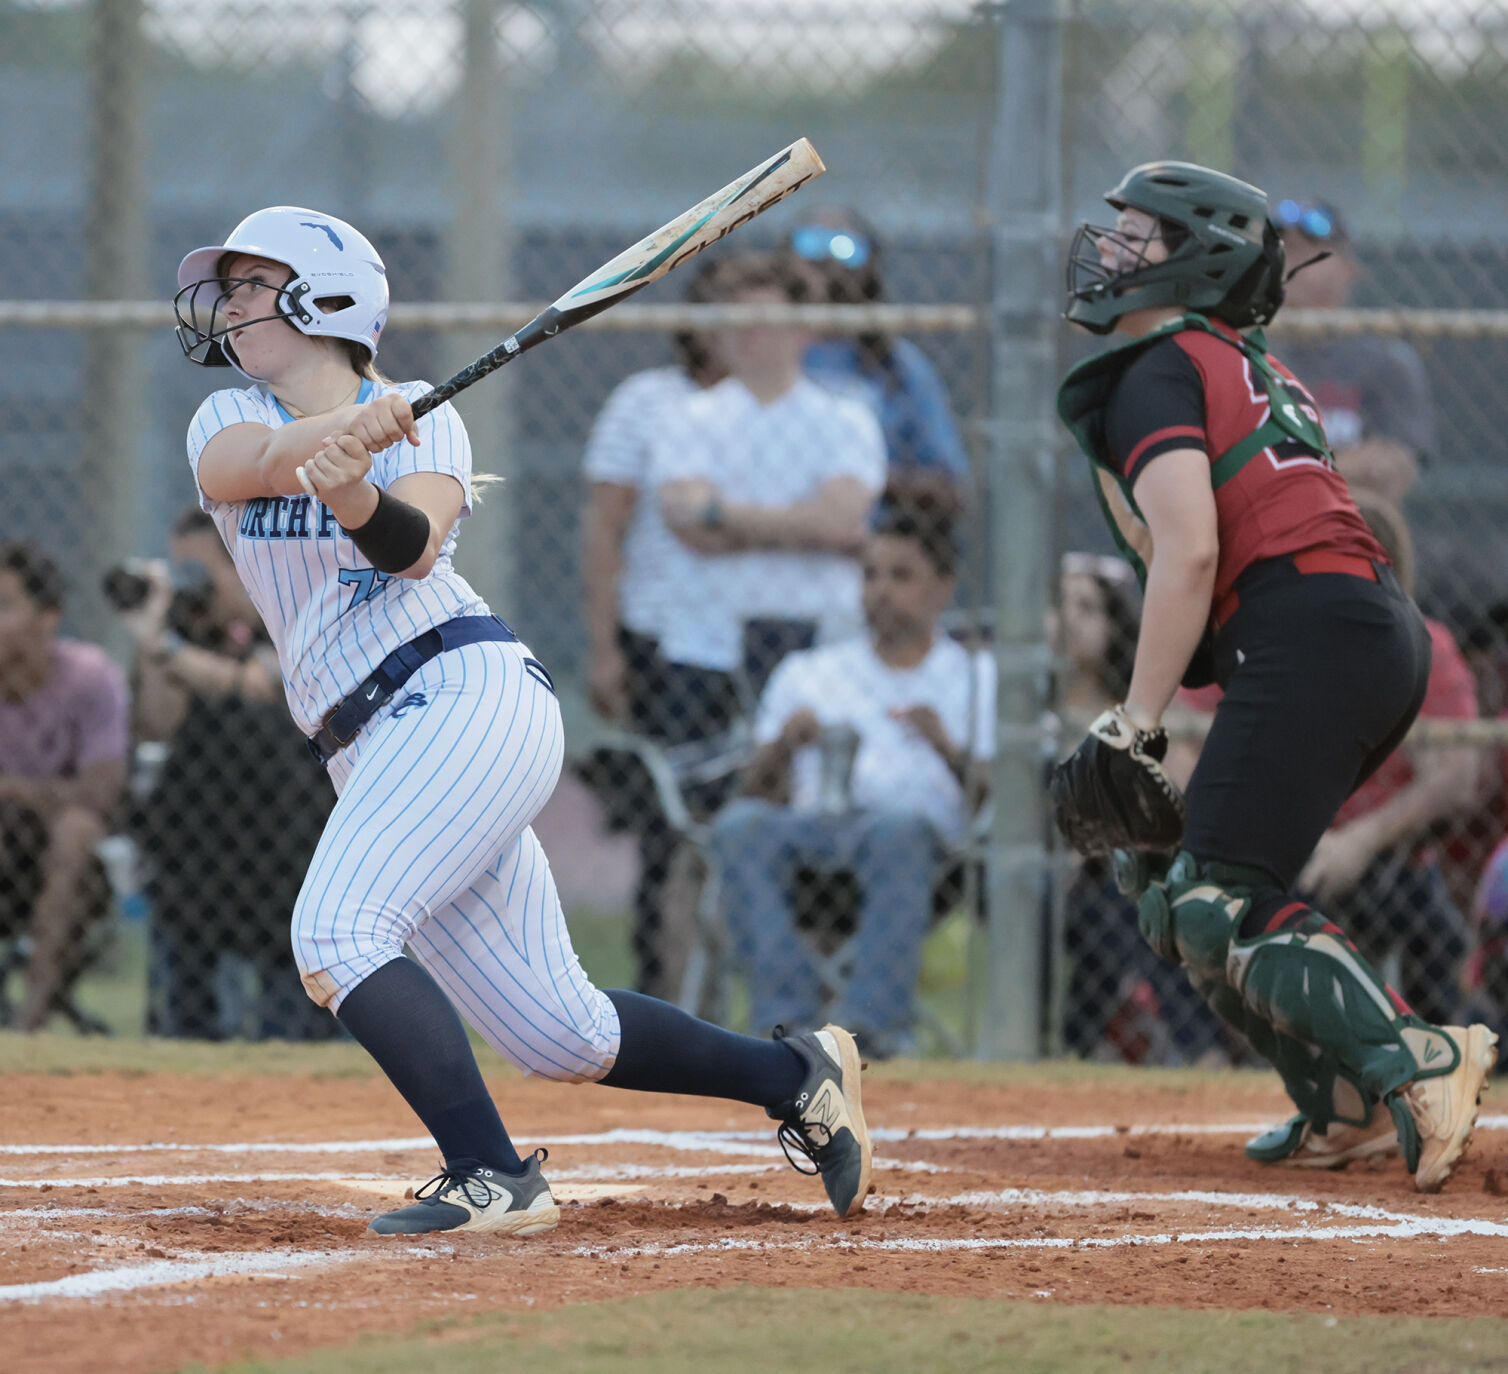 AREA ROUNDUP: North Port breaks out of slump against PC